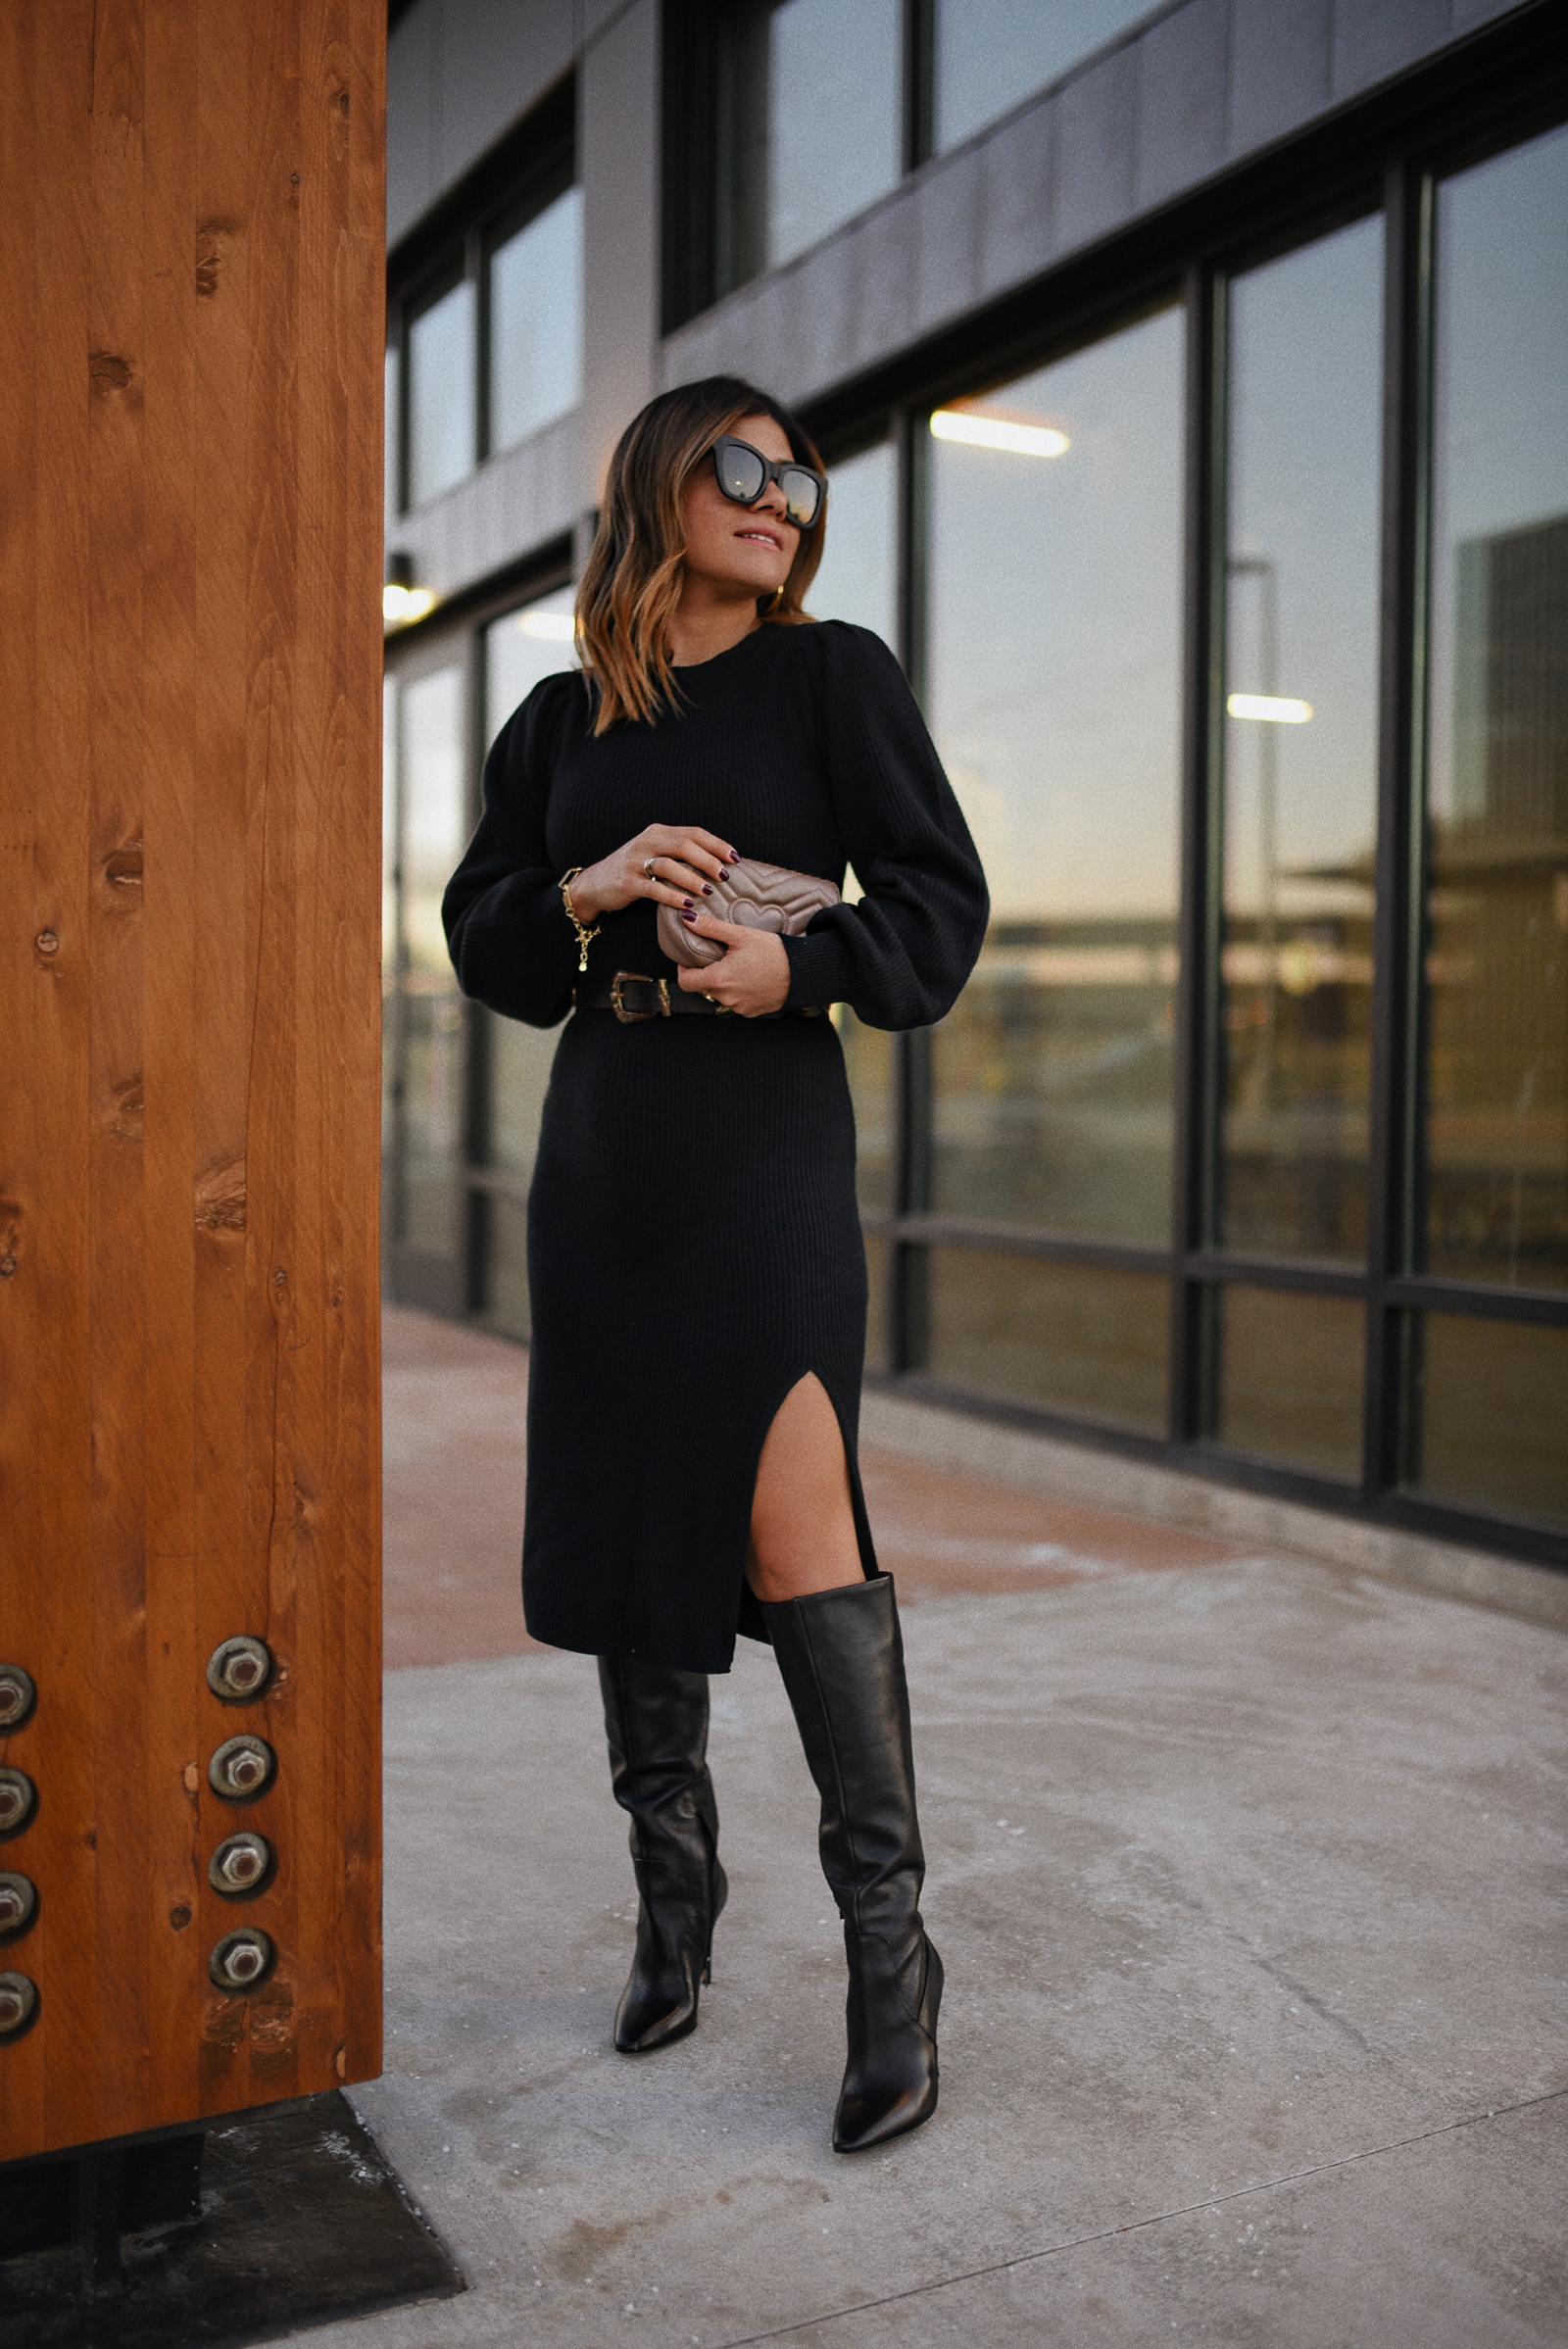 Carolina Hellal of Chic Talk wearing an Abercrombie Knit sweater dress, Vince Camuto Tall Black boots, QUAY sunglasses and Gucci crossbody bag.